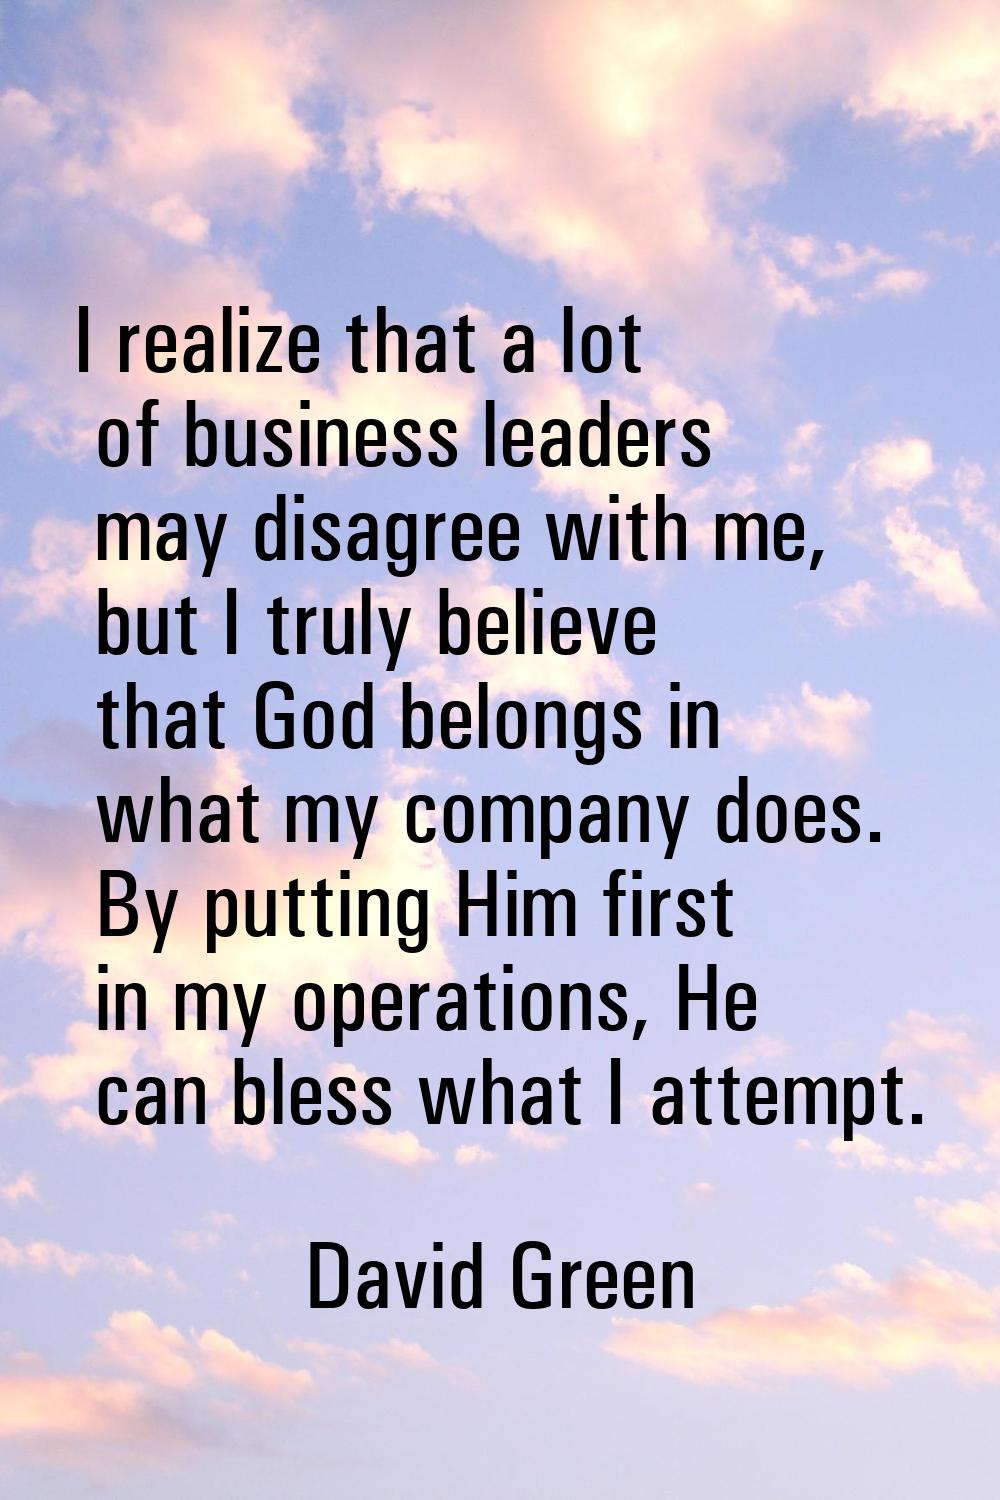 I realize that a lot of business leaders may disagree with me, but I truly believe that God belongs